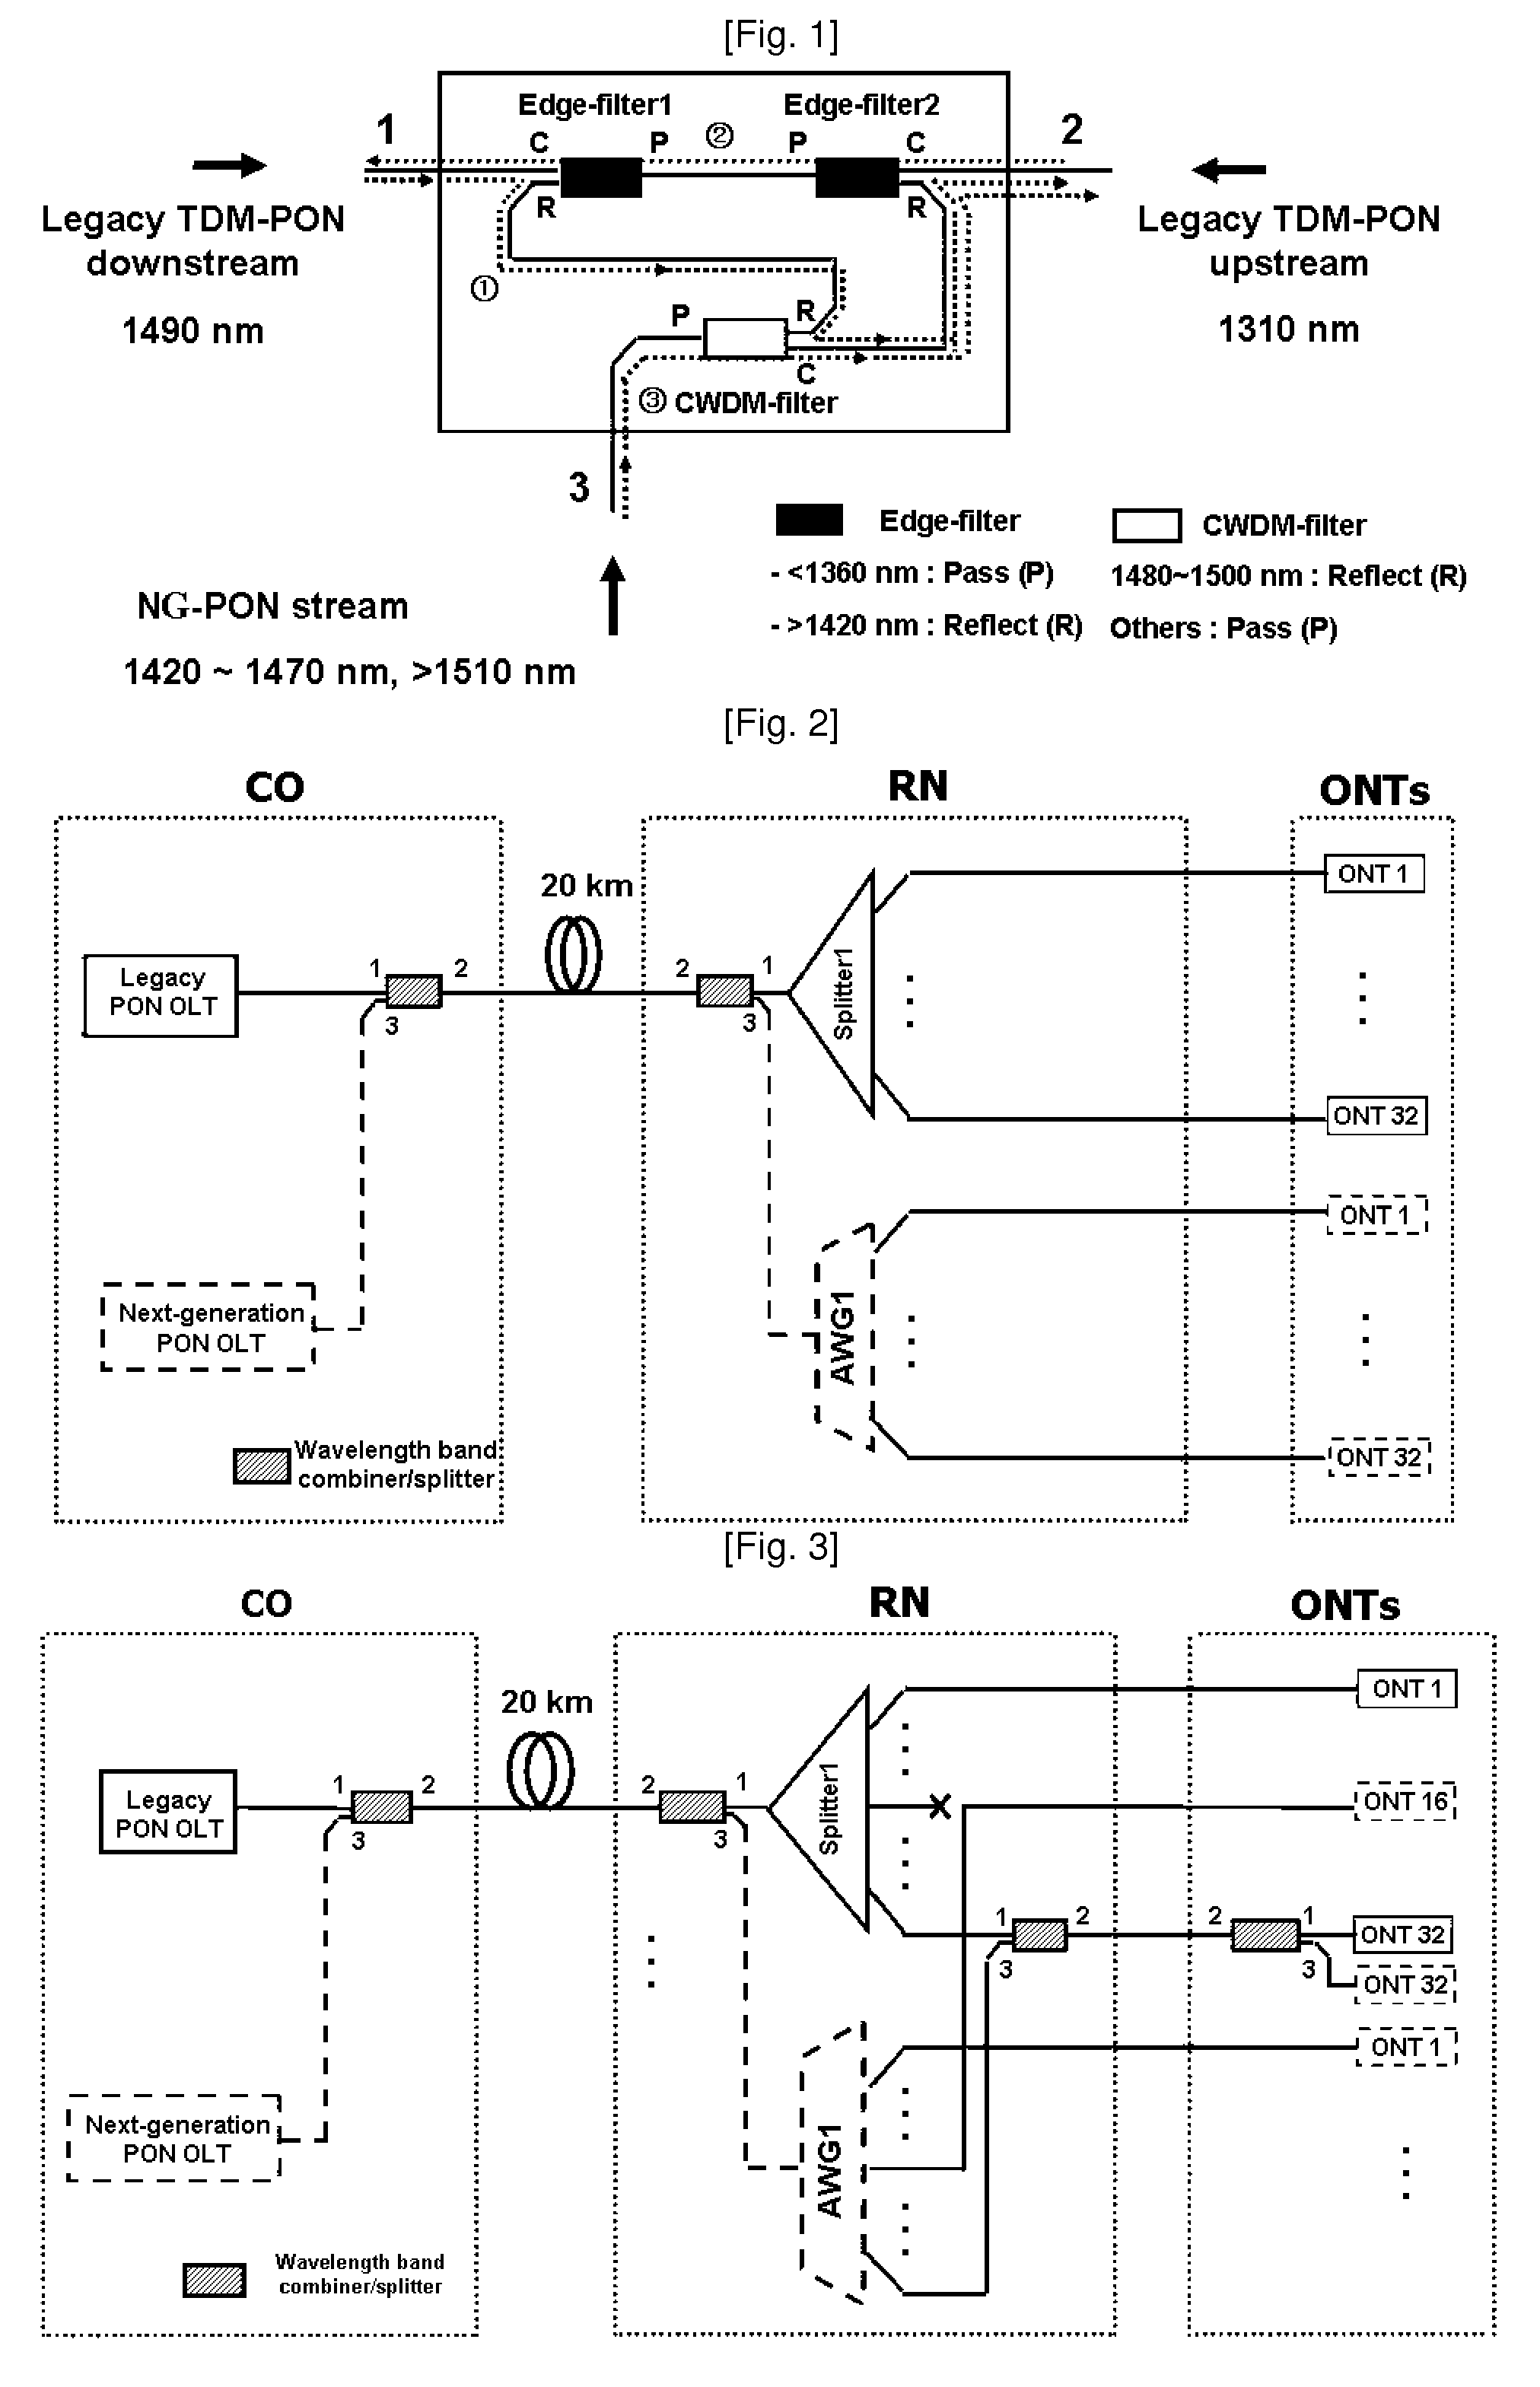 Method and network architecture for upgrading legacy passive optical network to wavelength division multiplexing passive optical network based next-generation passive optical network